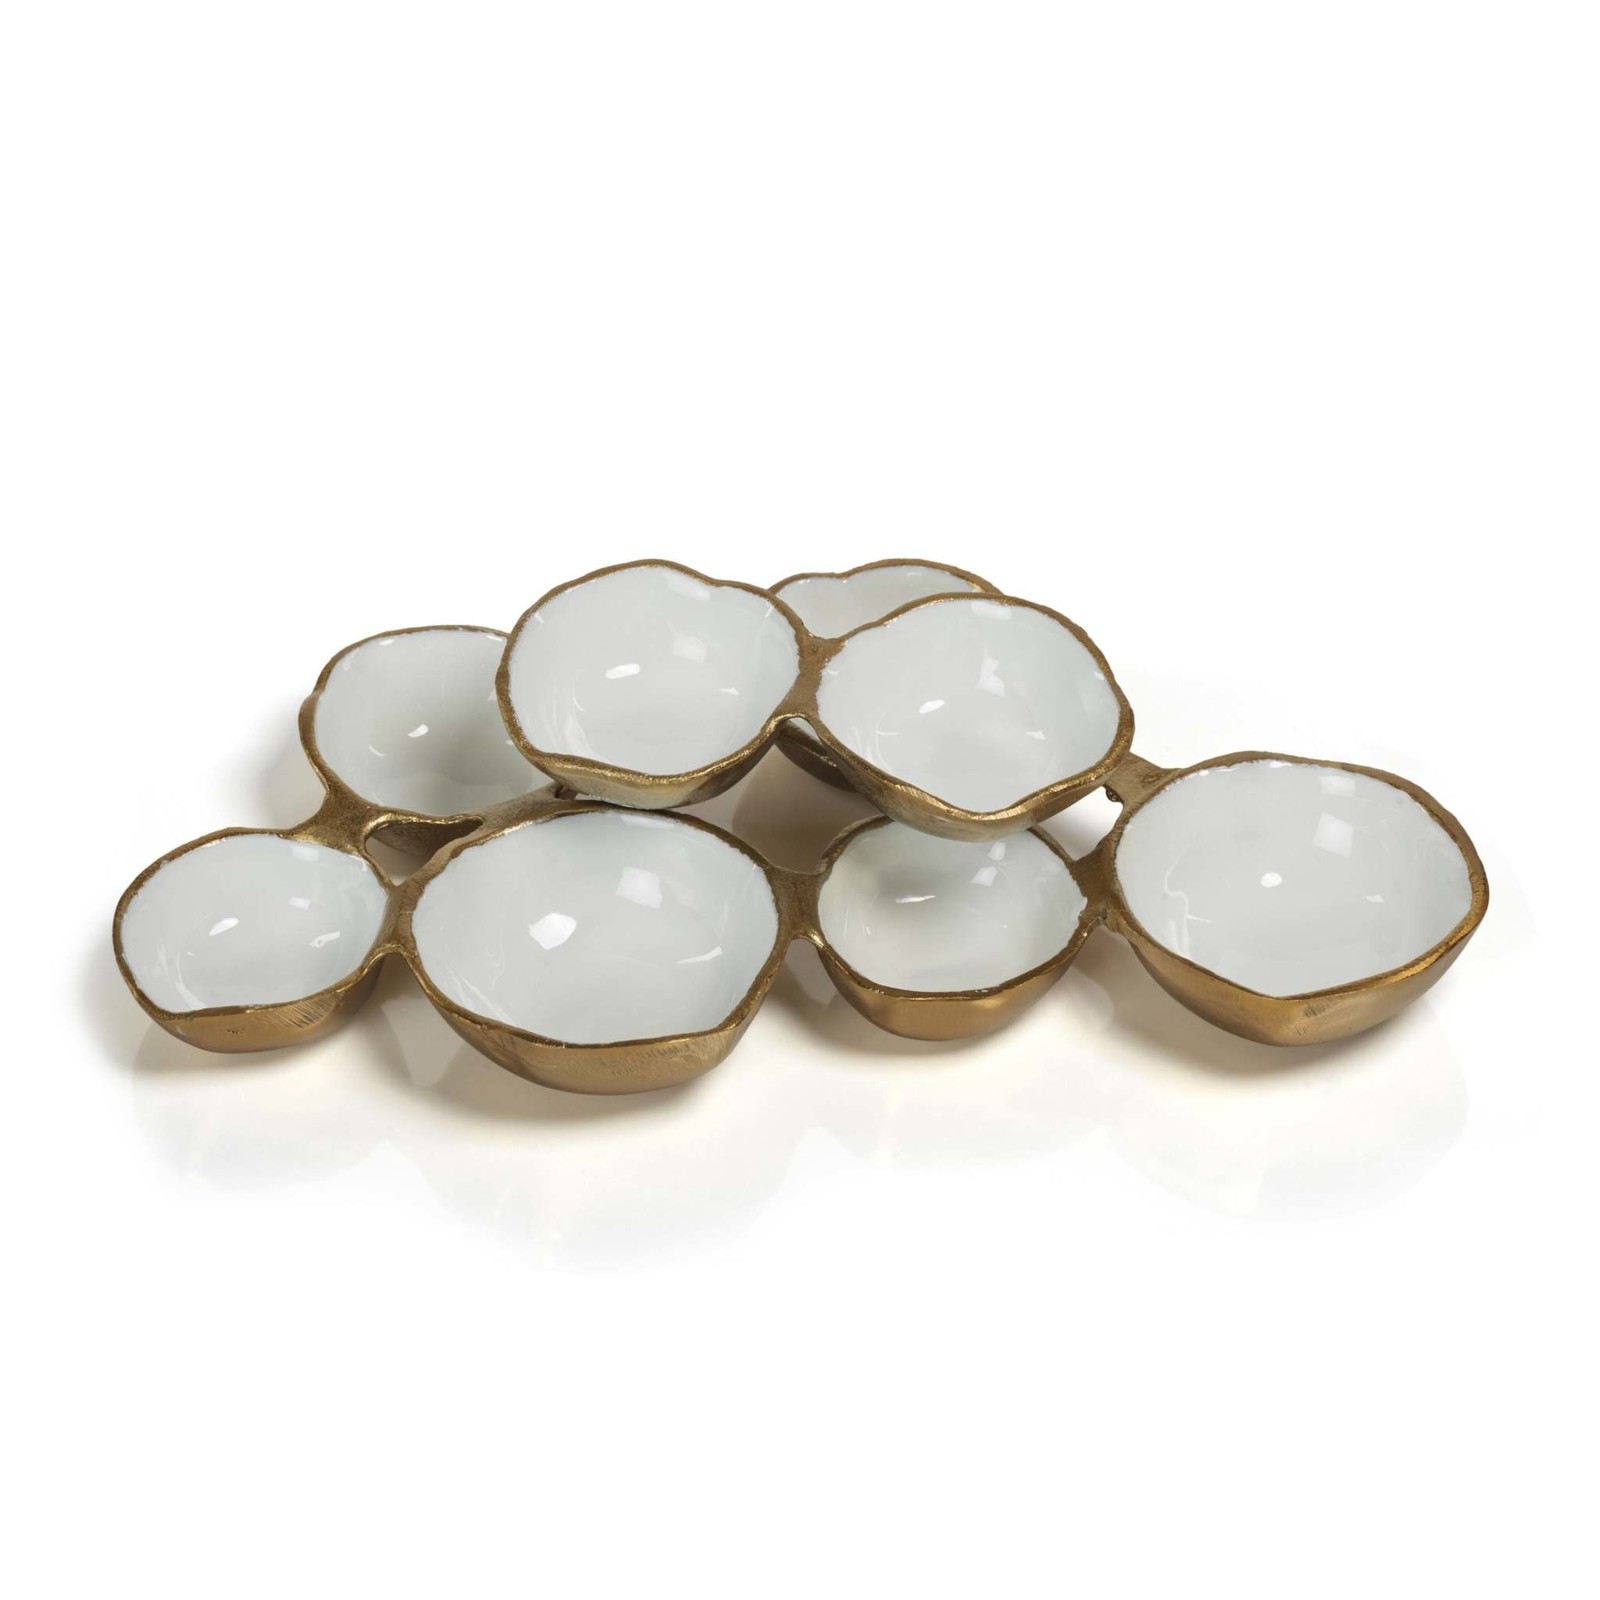 Zodax Small Cluster of Eight Serving Bowls - Gold and White  IN-7243 loading=